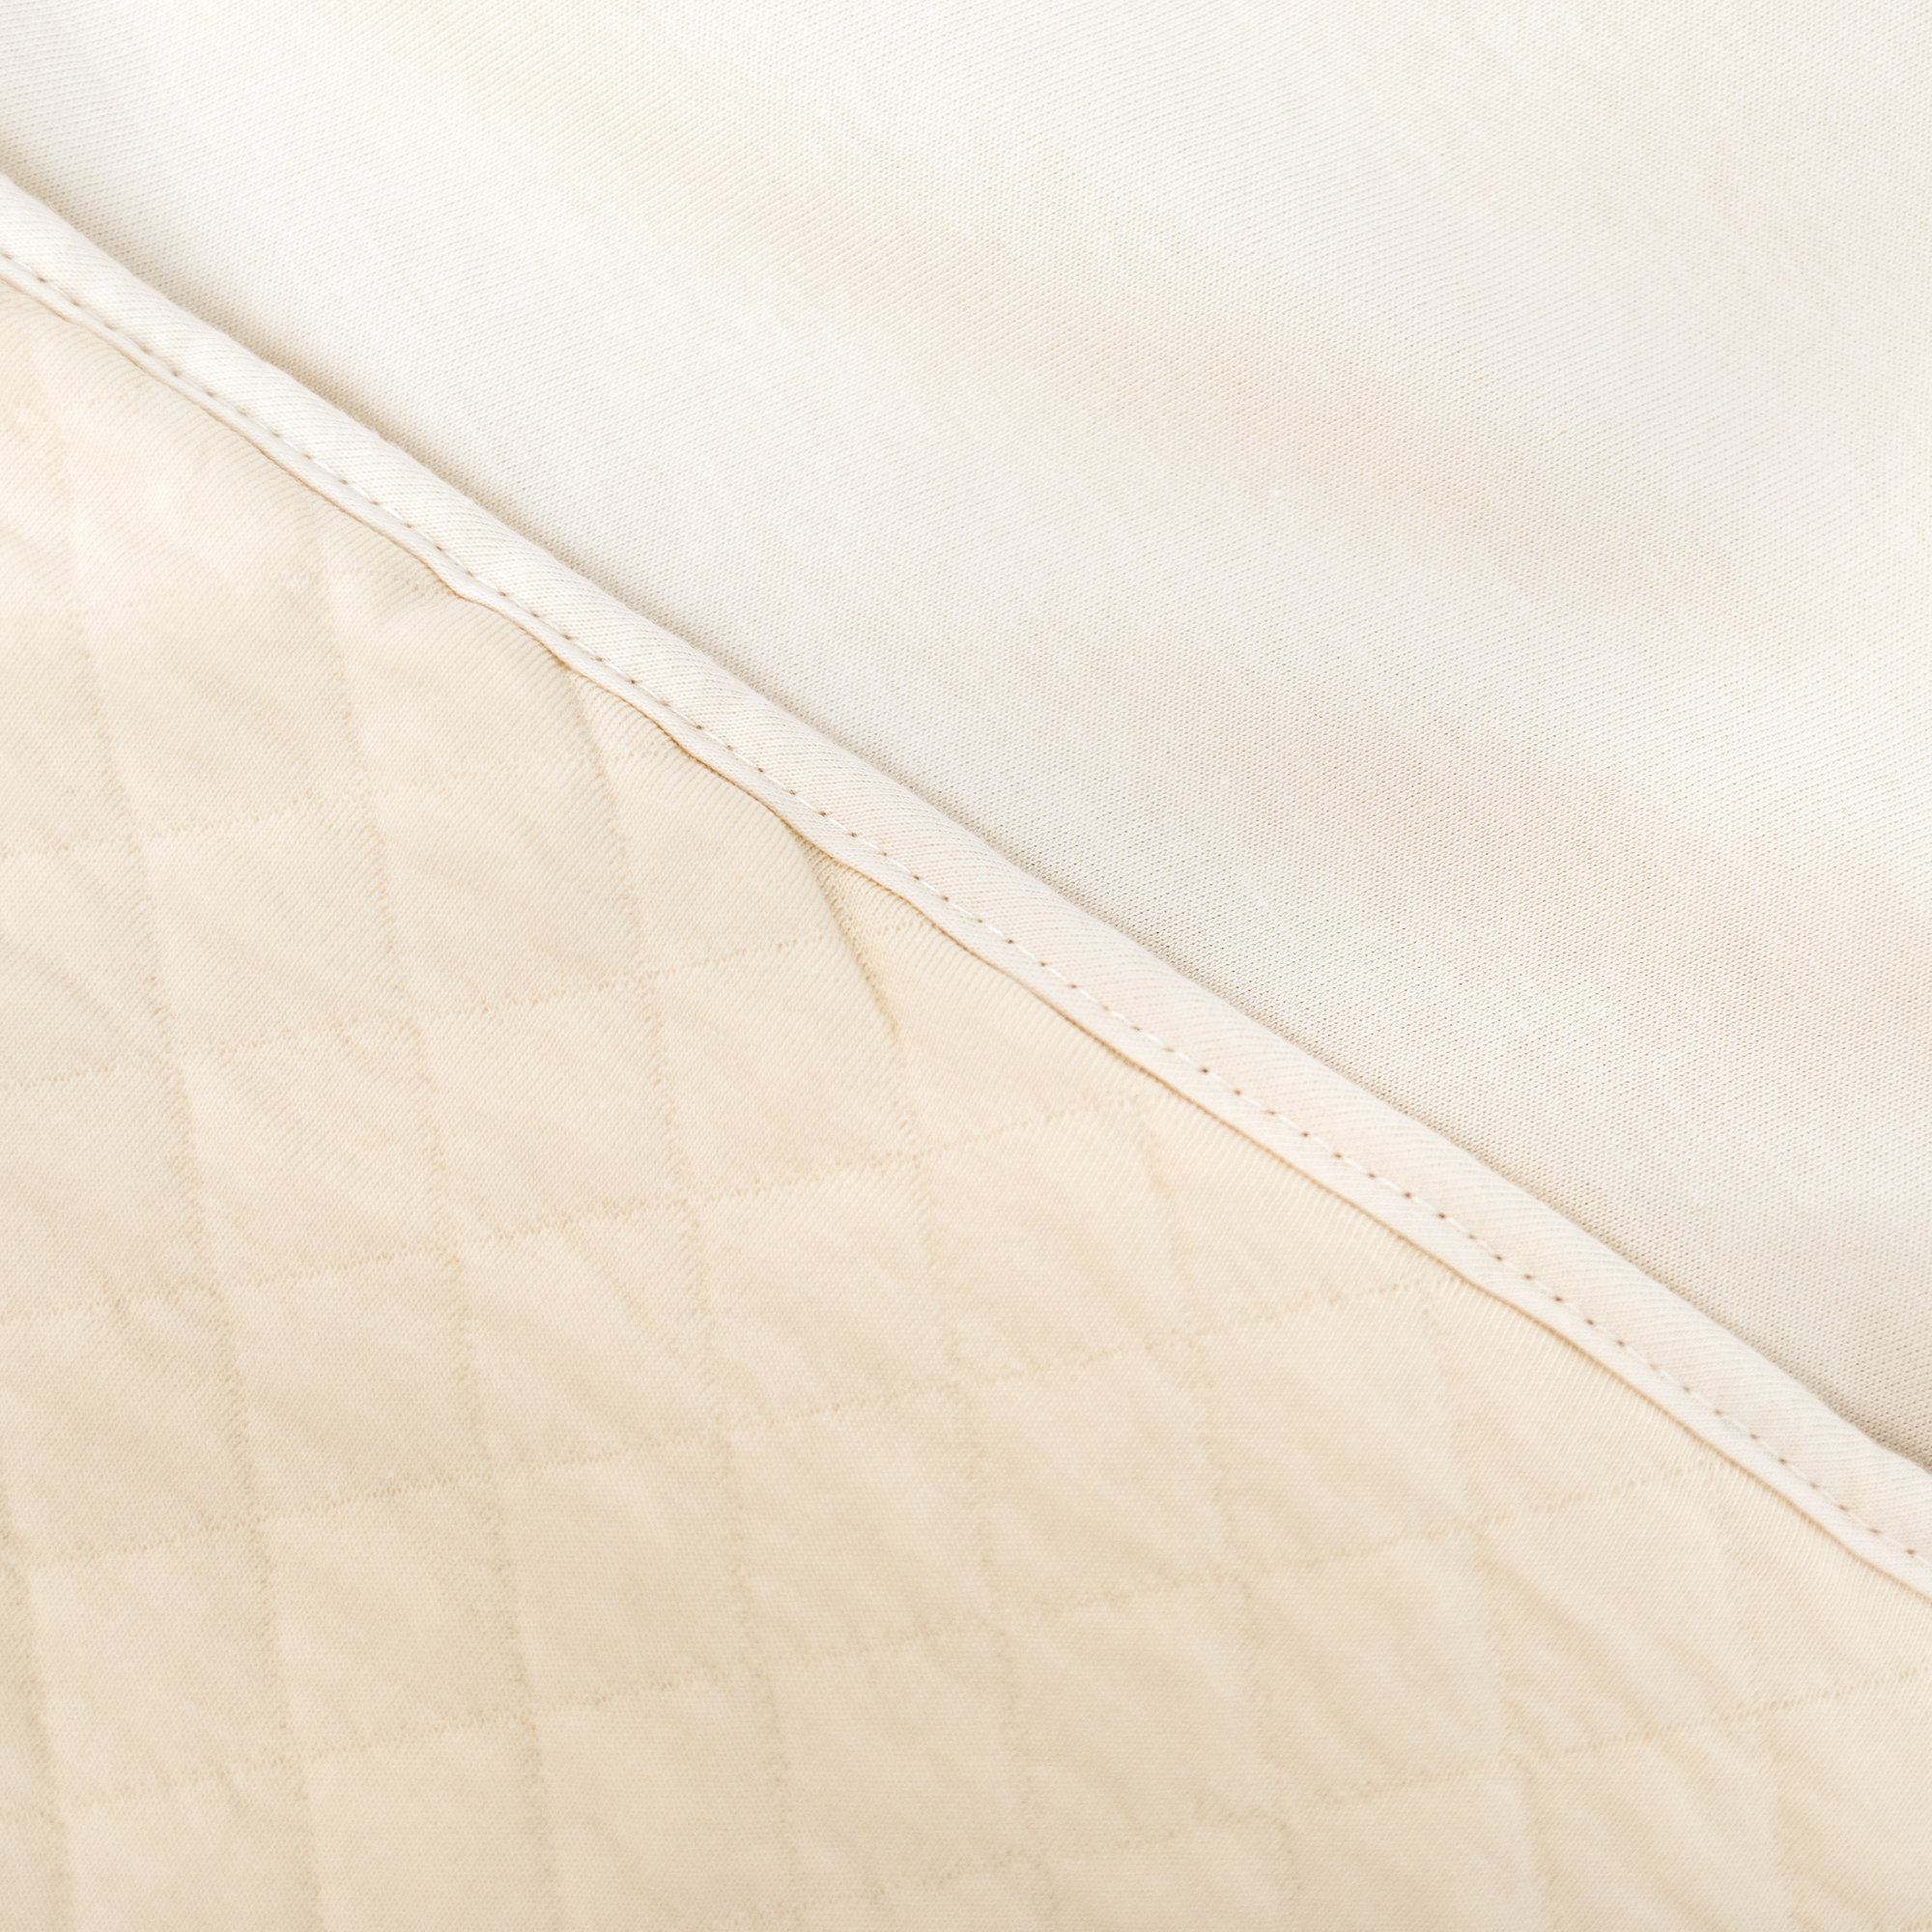 Manta Pady quilted + jersey 75x100cm QUILT Cream tog 3